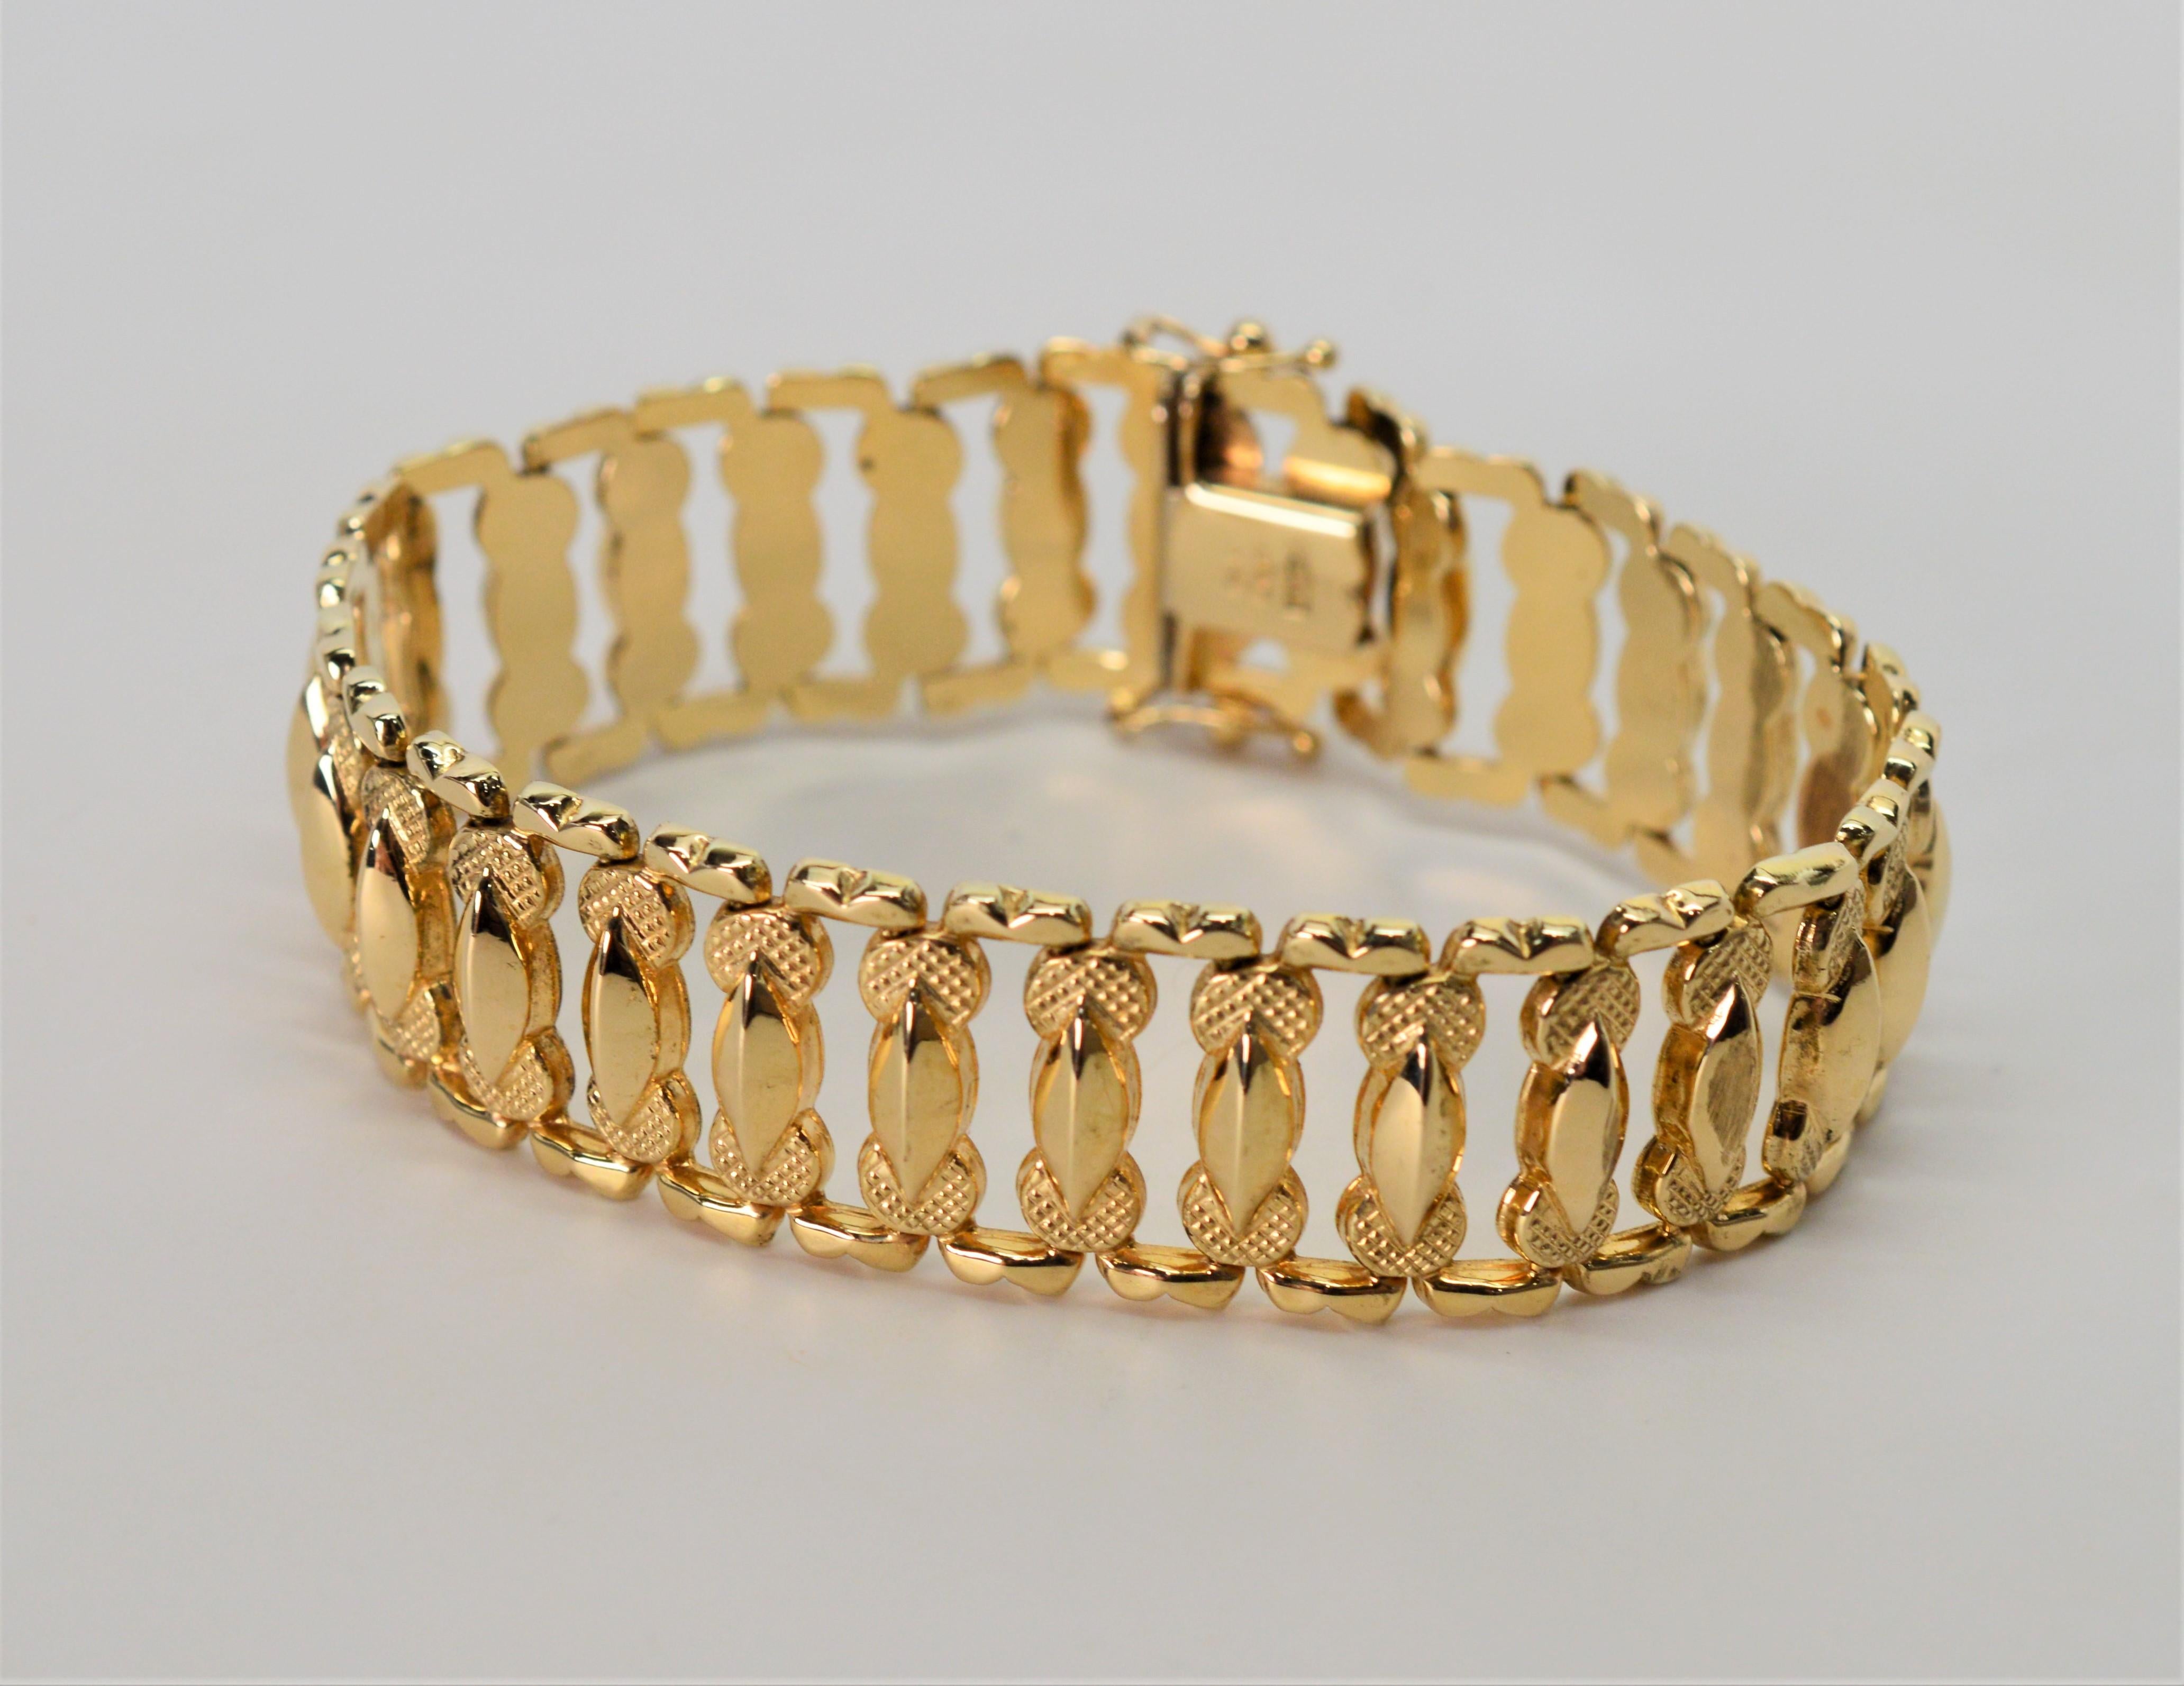 Quality Italian made bracelet perfect for any jewelry wardrobe. 1950's style ladder link bracelet in bright fourteen karat 14K yellow gold. 
Measures 7- 1/4 inch in length and 5/8 inch wide. Outfitted with box clasp and two safety clips. Stamped and